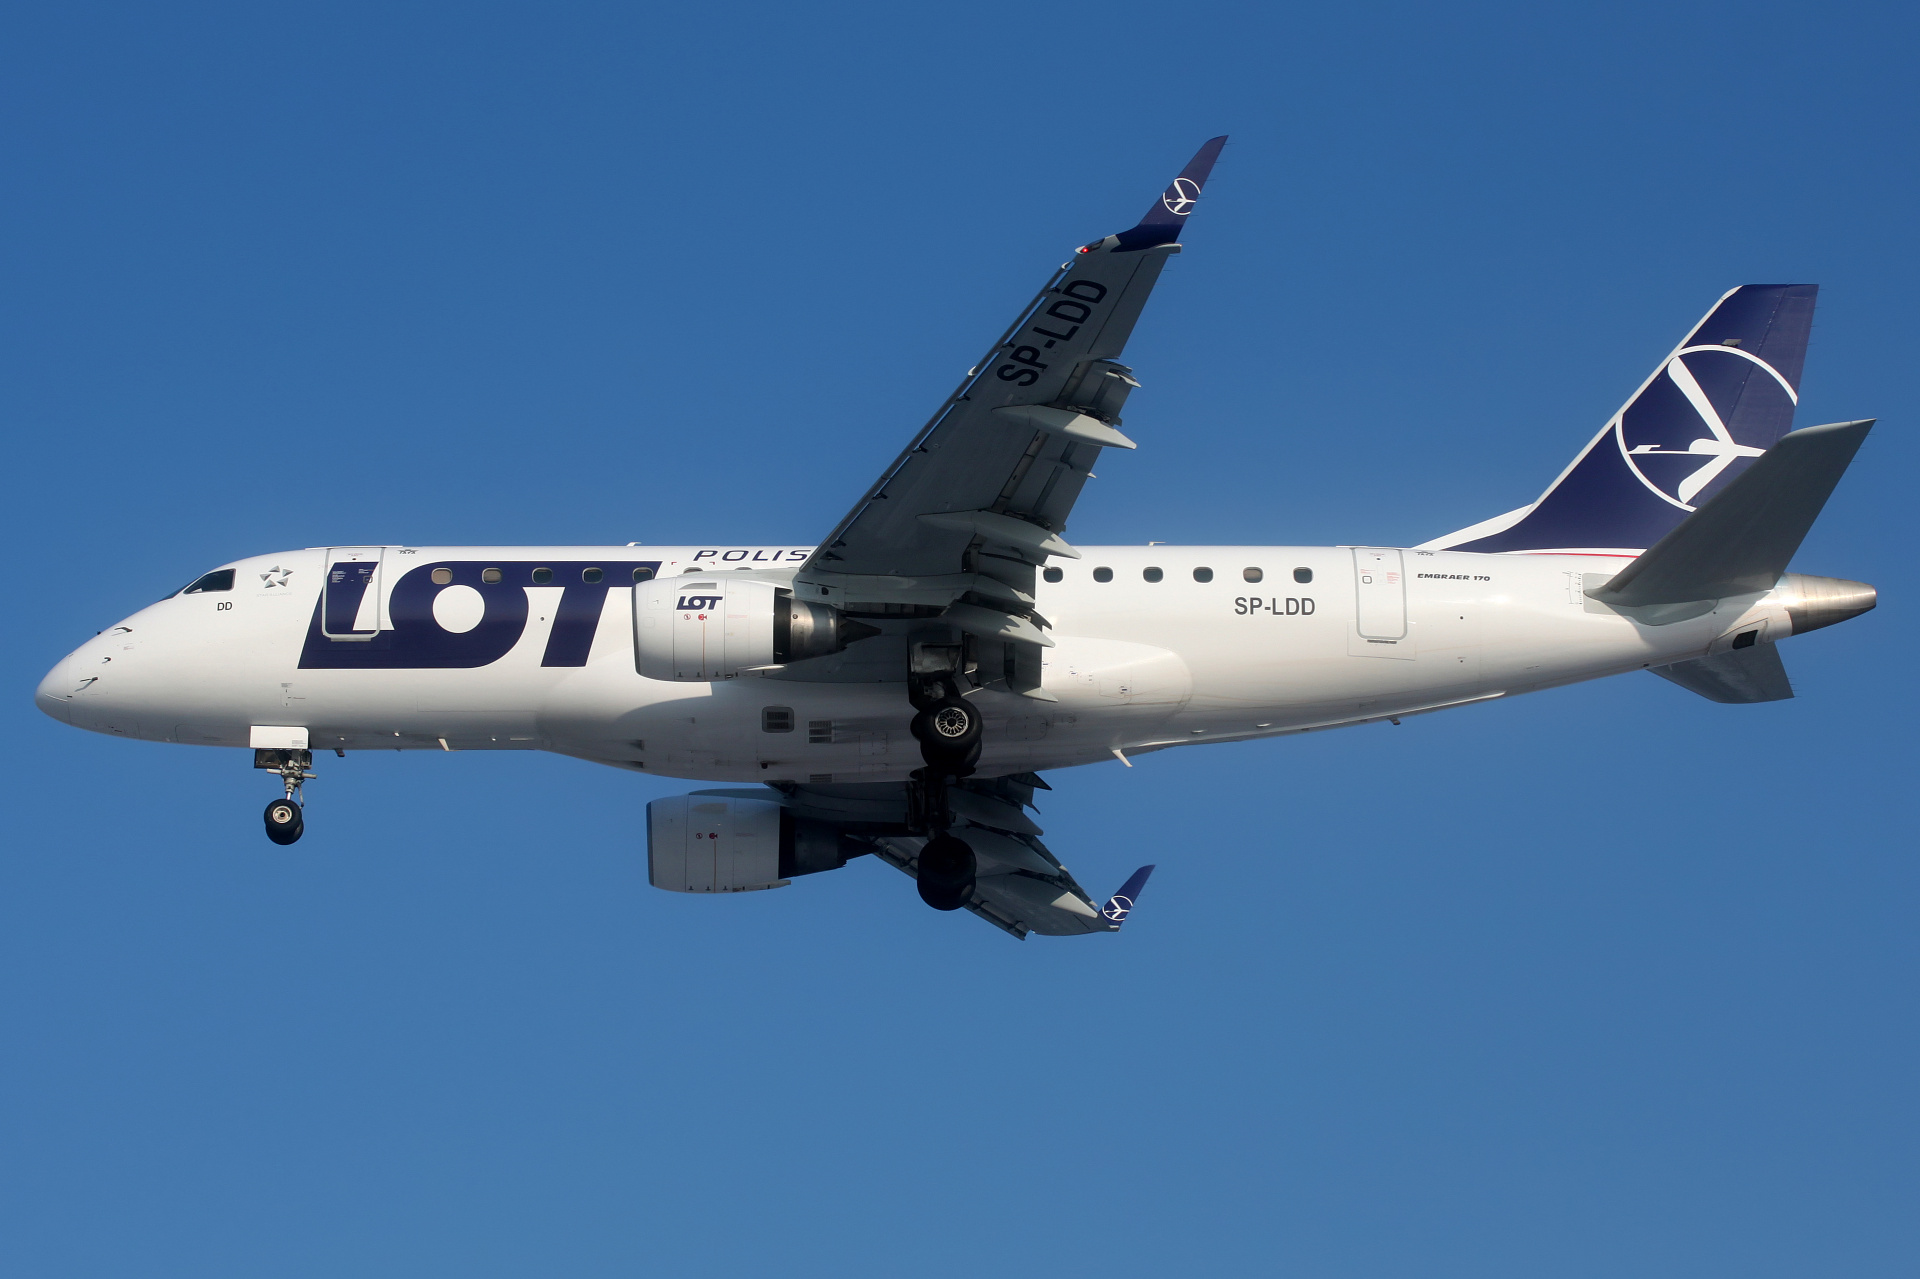 SP-LDD (new livery) (Aircraft » EPWA Spotting » Embraer E170 » LOT Polish Airlines)